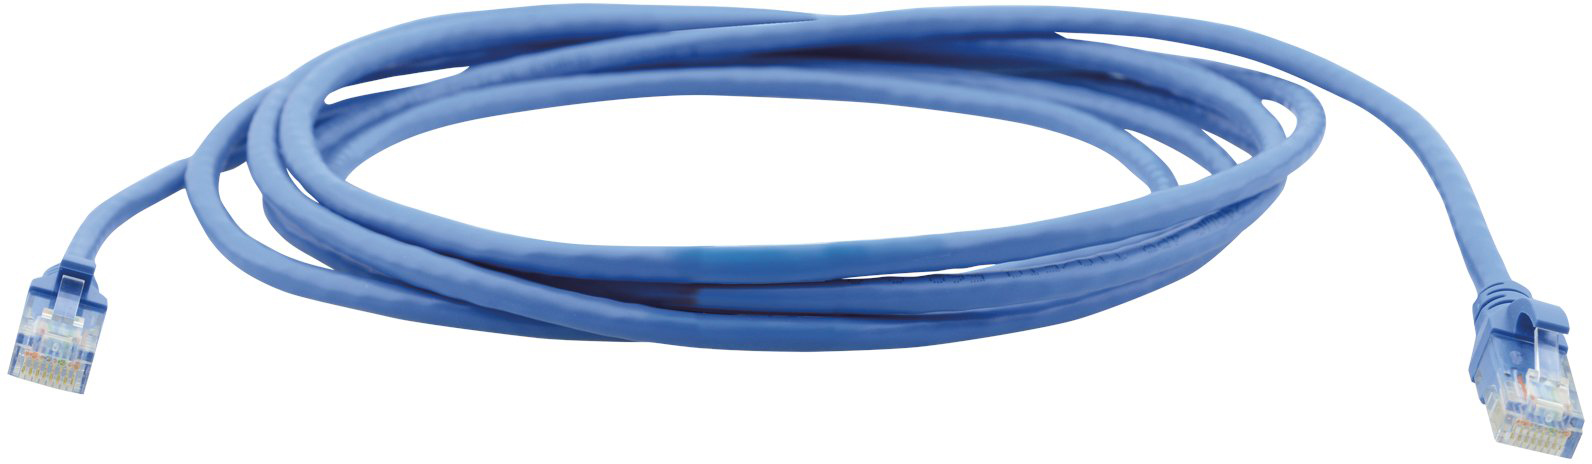 You Recently Viewed Kramer Slim CAT6 UTP Patch Cable Image